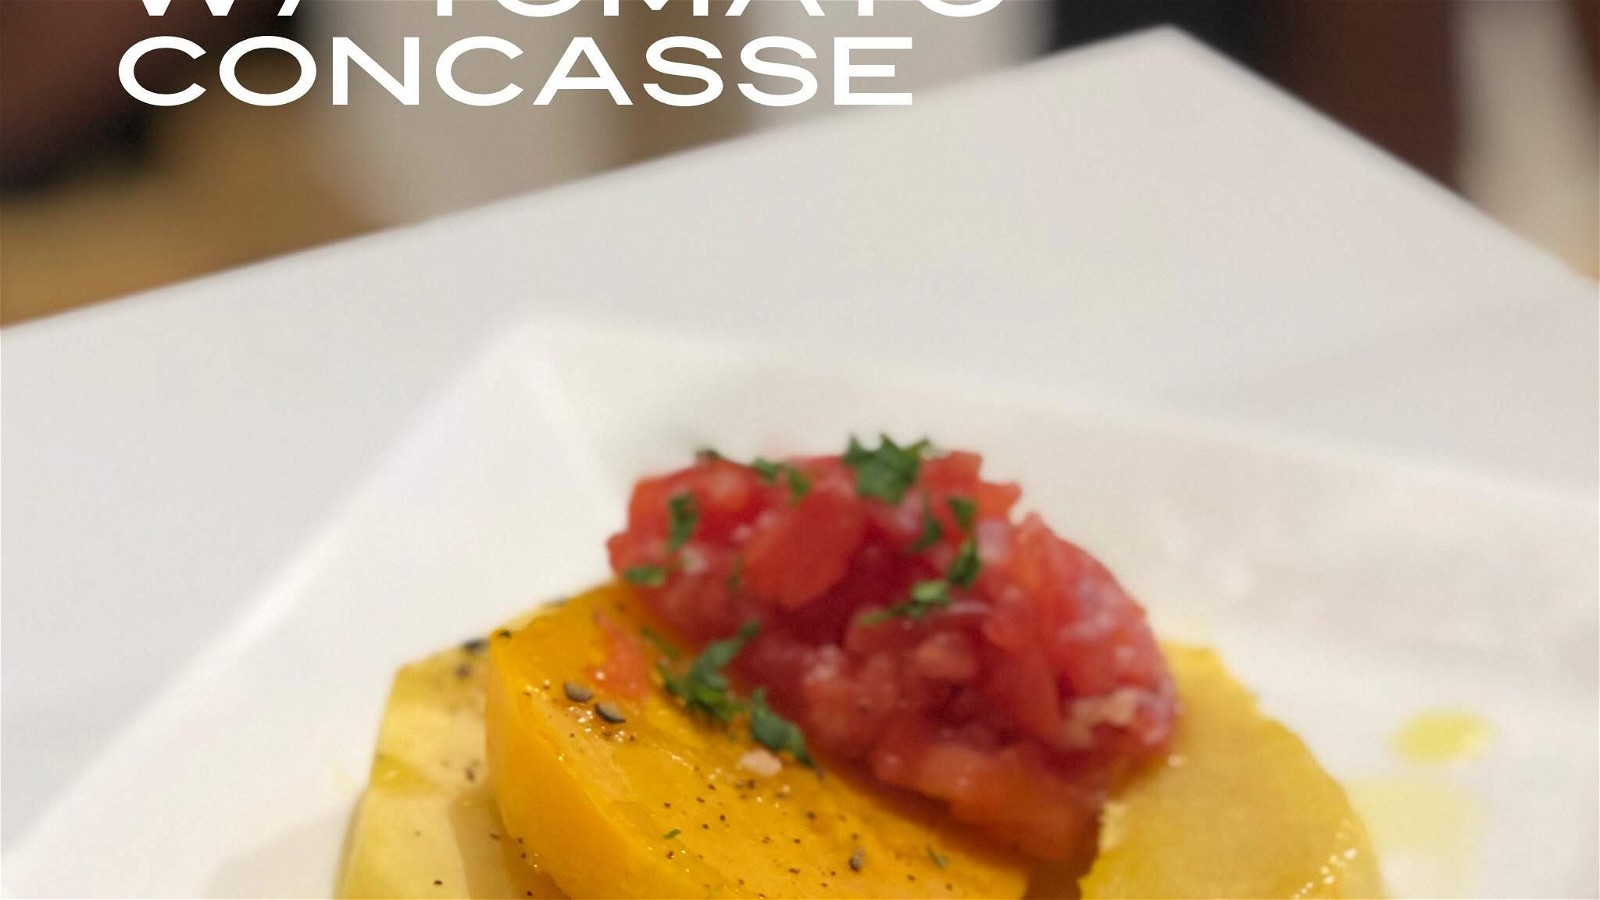 Image of Roasted Squash with Tomato Concasse